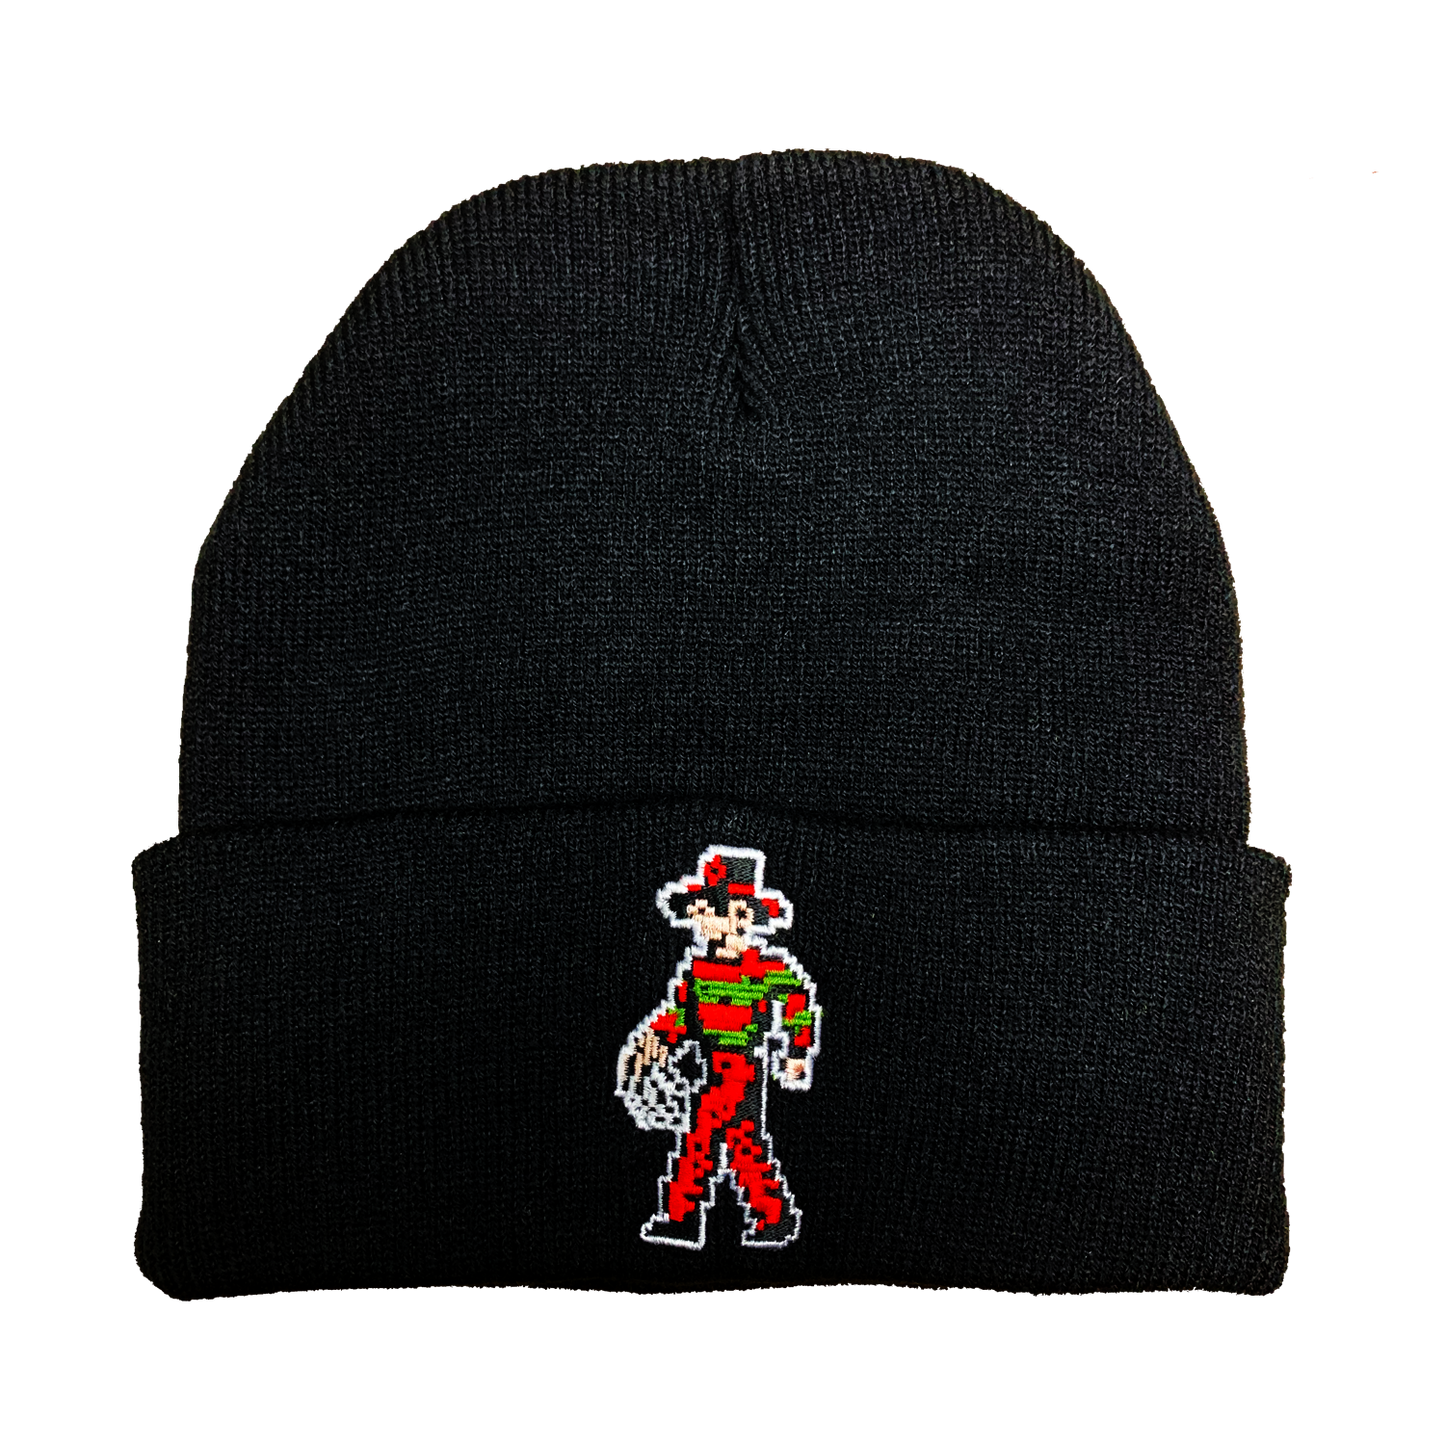 8-bit Freddy Embroidered Beanie - UNMASKED Horror & Punk Patches and Decor